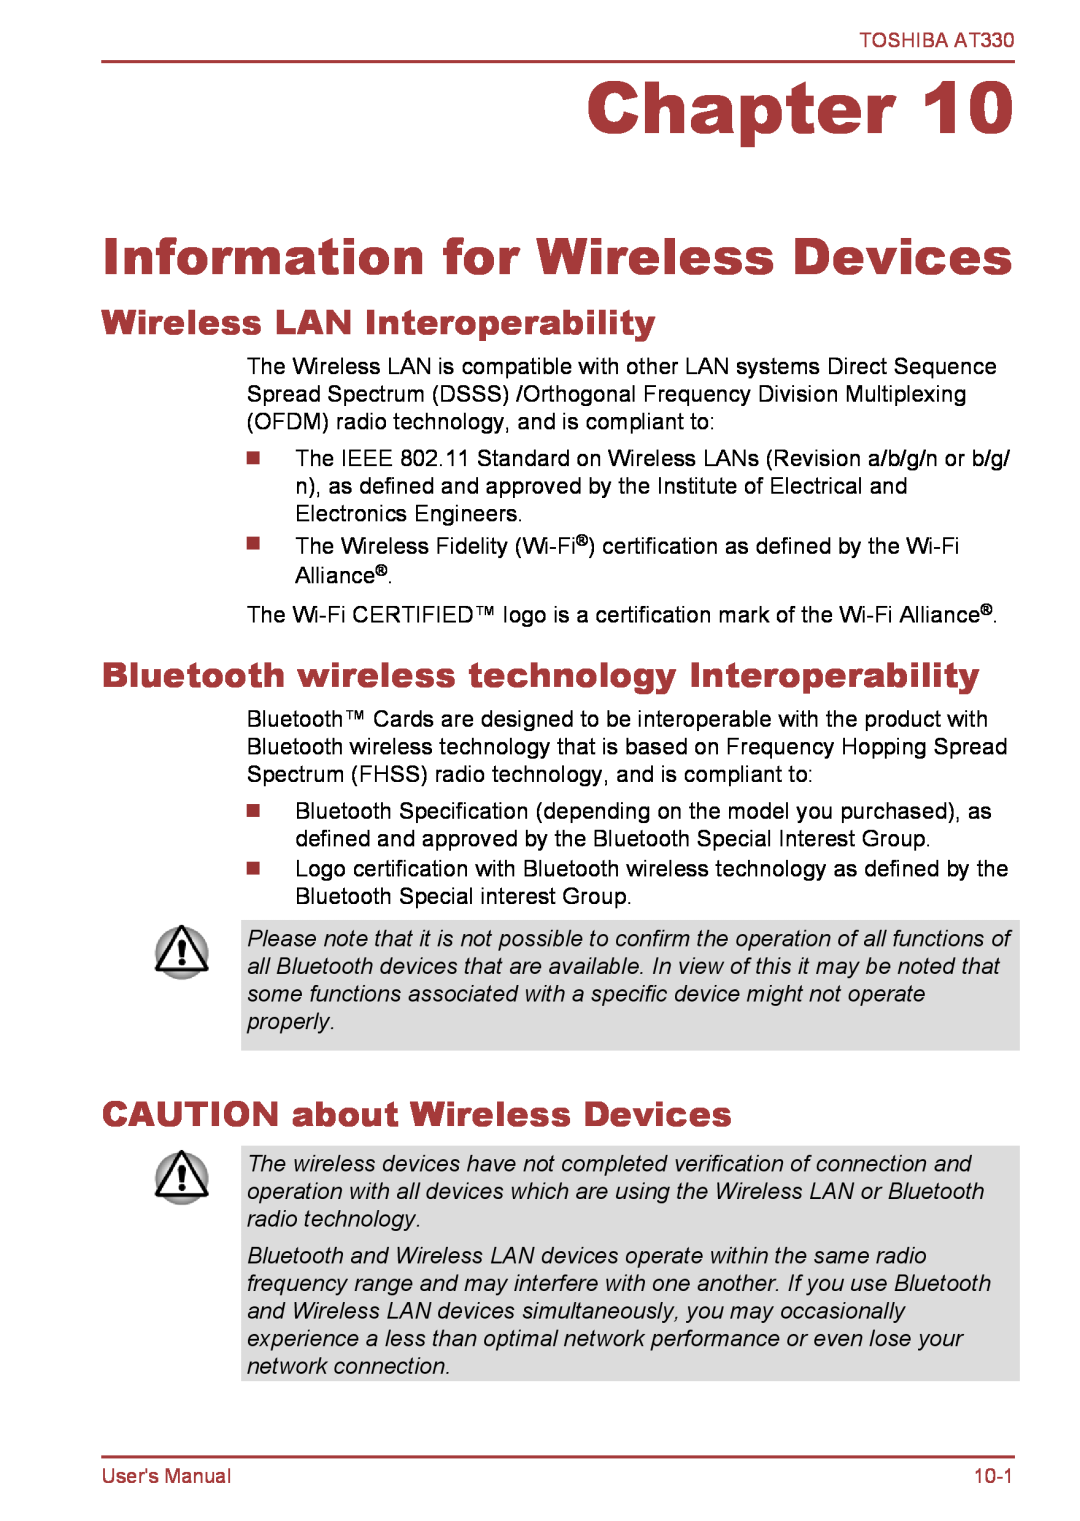 Toshiba at330 Information for Wireless Devices, Wireless LAN Interoperability, CAUTION about Wireless Devices, Chapter 